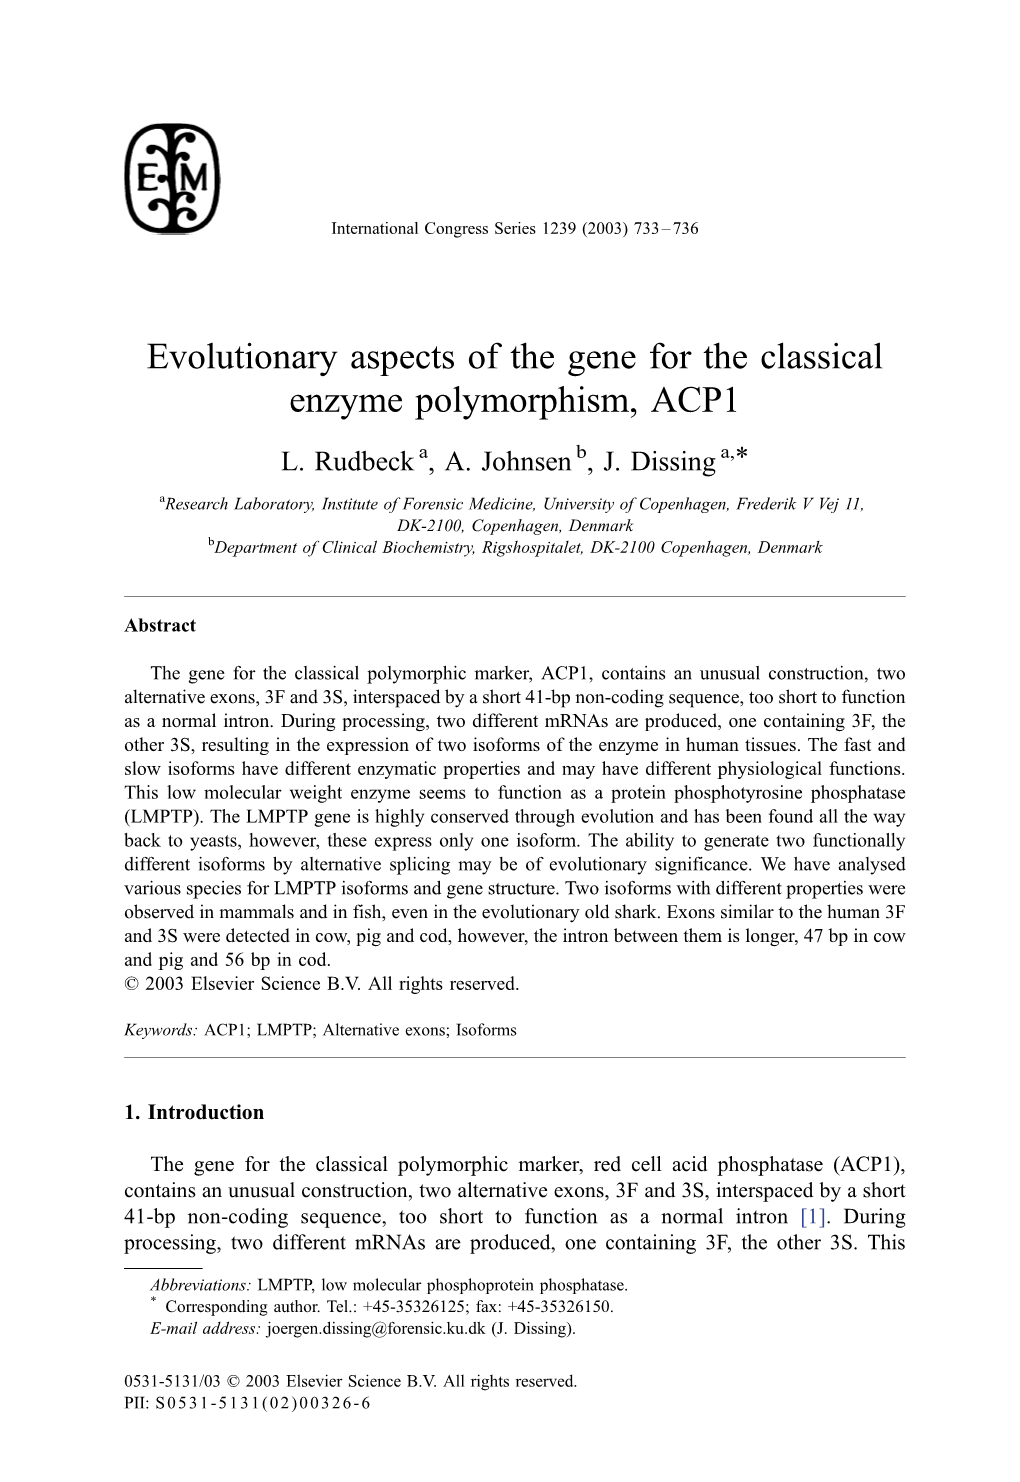 Evolutionary Aspects of the Gene for the Classical Enzyme Polymorphism, ACP1